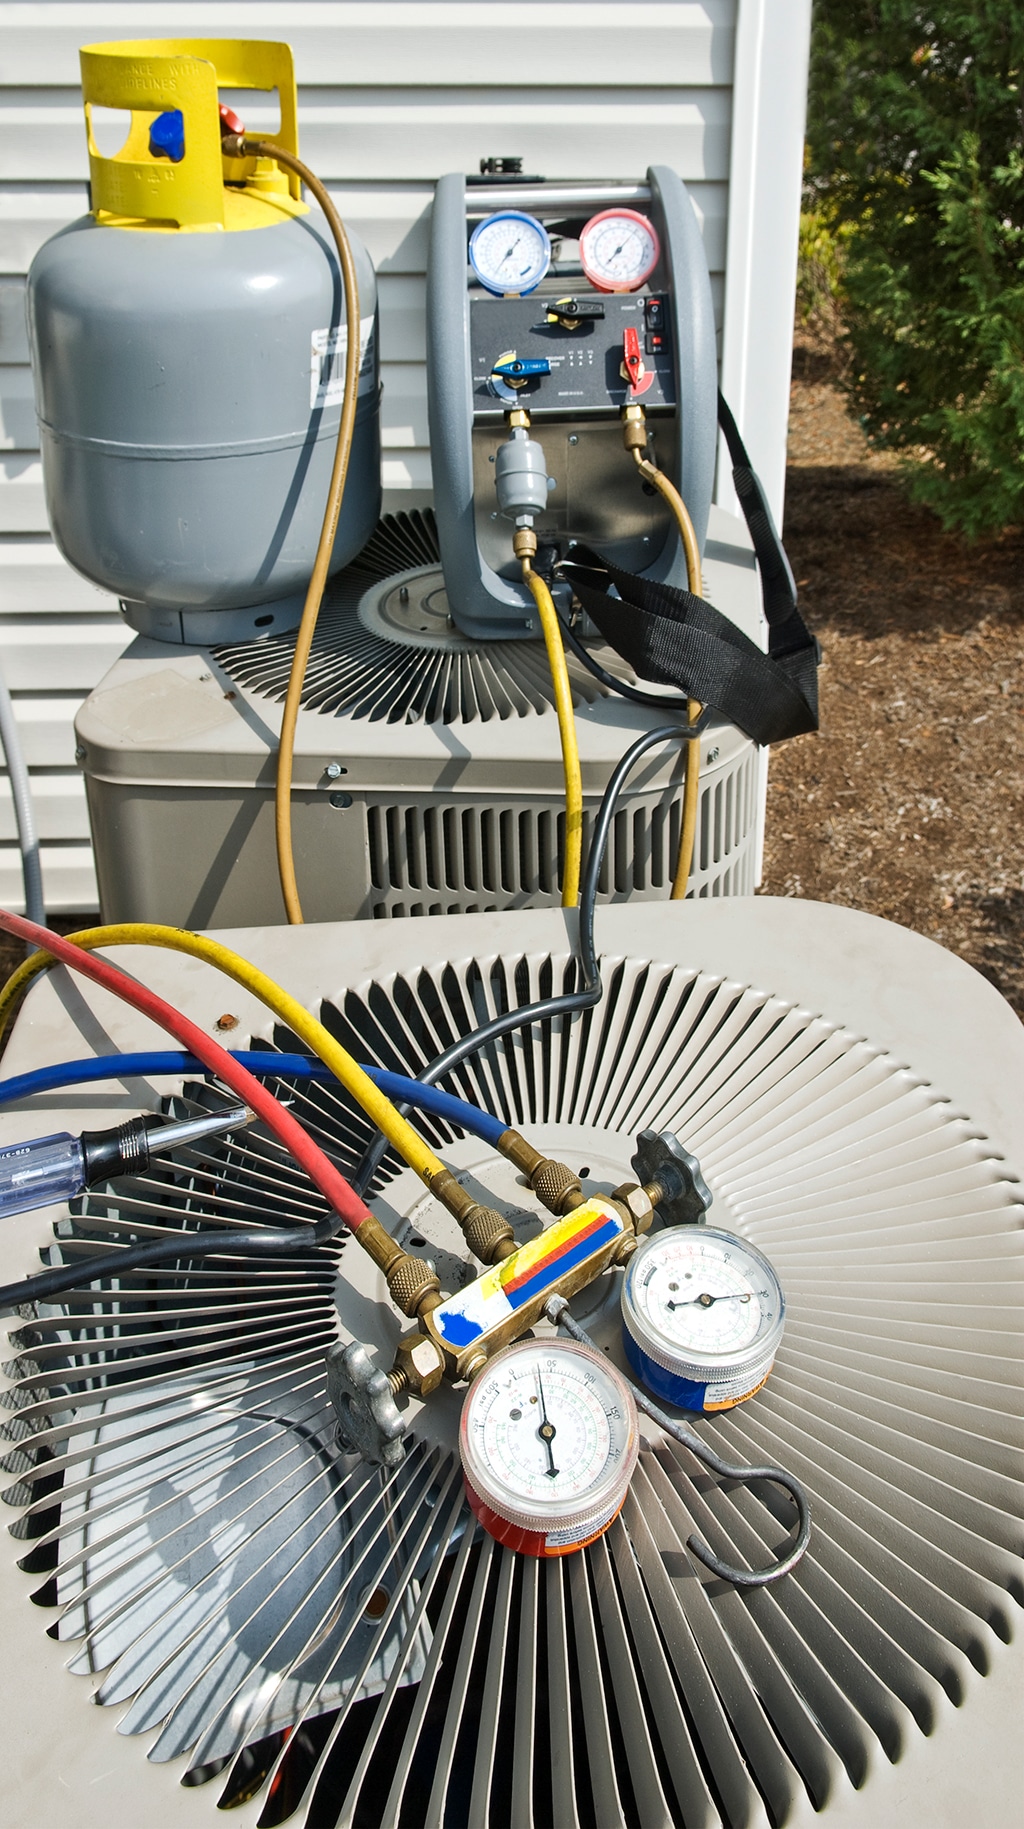 Call One Hour Air Conditioning & Heating Of Dallas For Help With Air Conditioning Repair | Frisco, TX